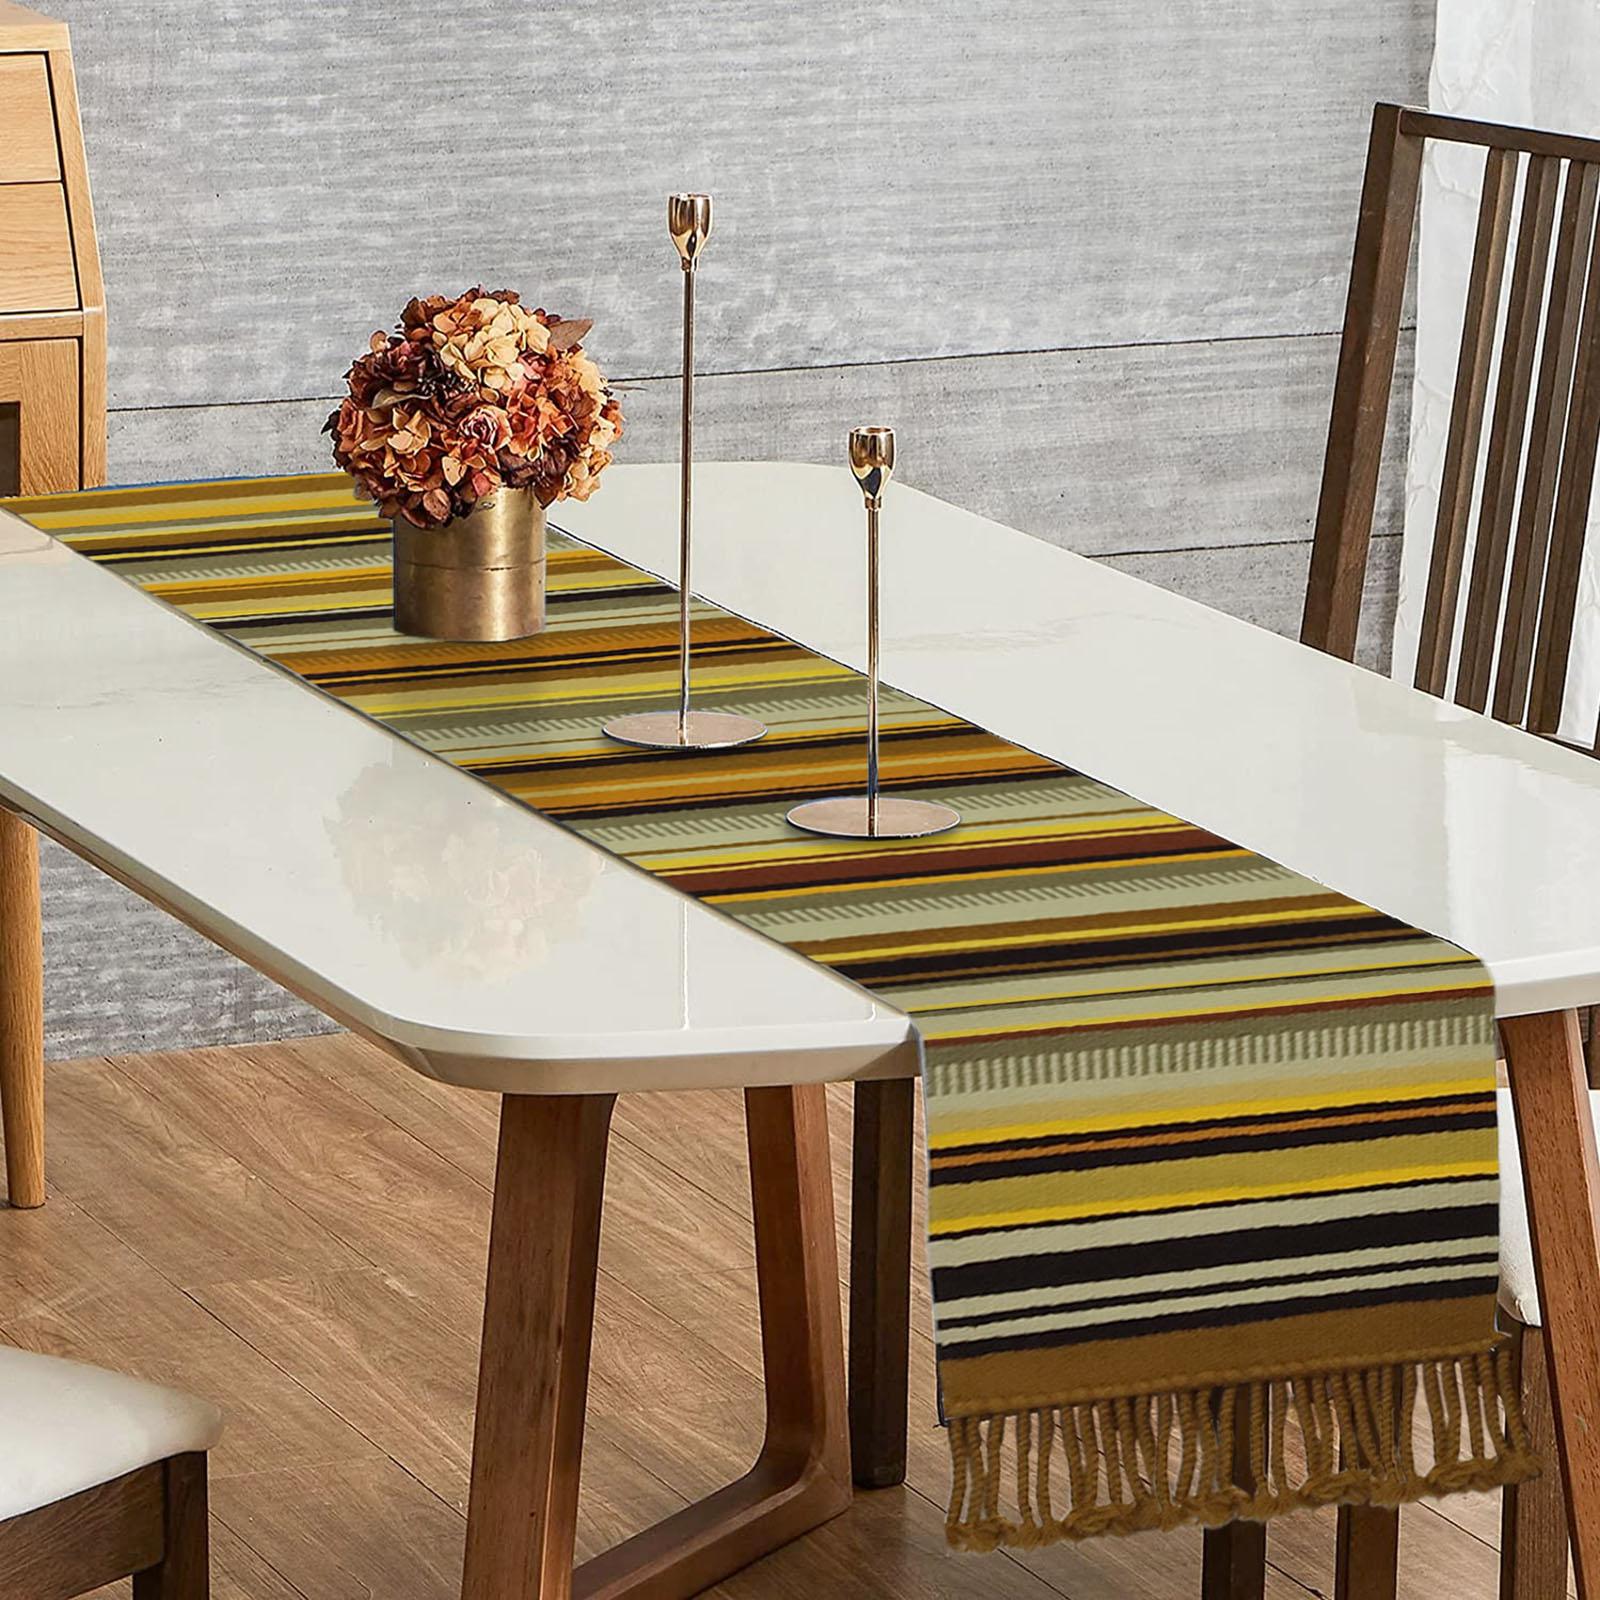 Handmade Finnish Raanu Mid-Century table runner, 1960s

This beautiful hand-woven table runner is made of wool, traditional Finnish crafts .
Wonderful colors like a beautiful autumn day, in shades of yellow, green, brown.
Each side finished with